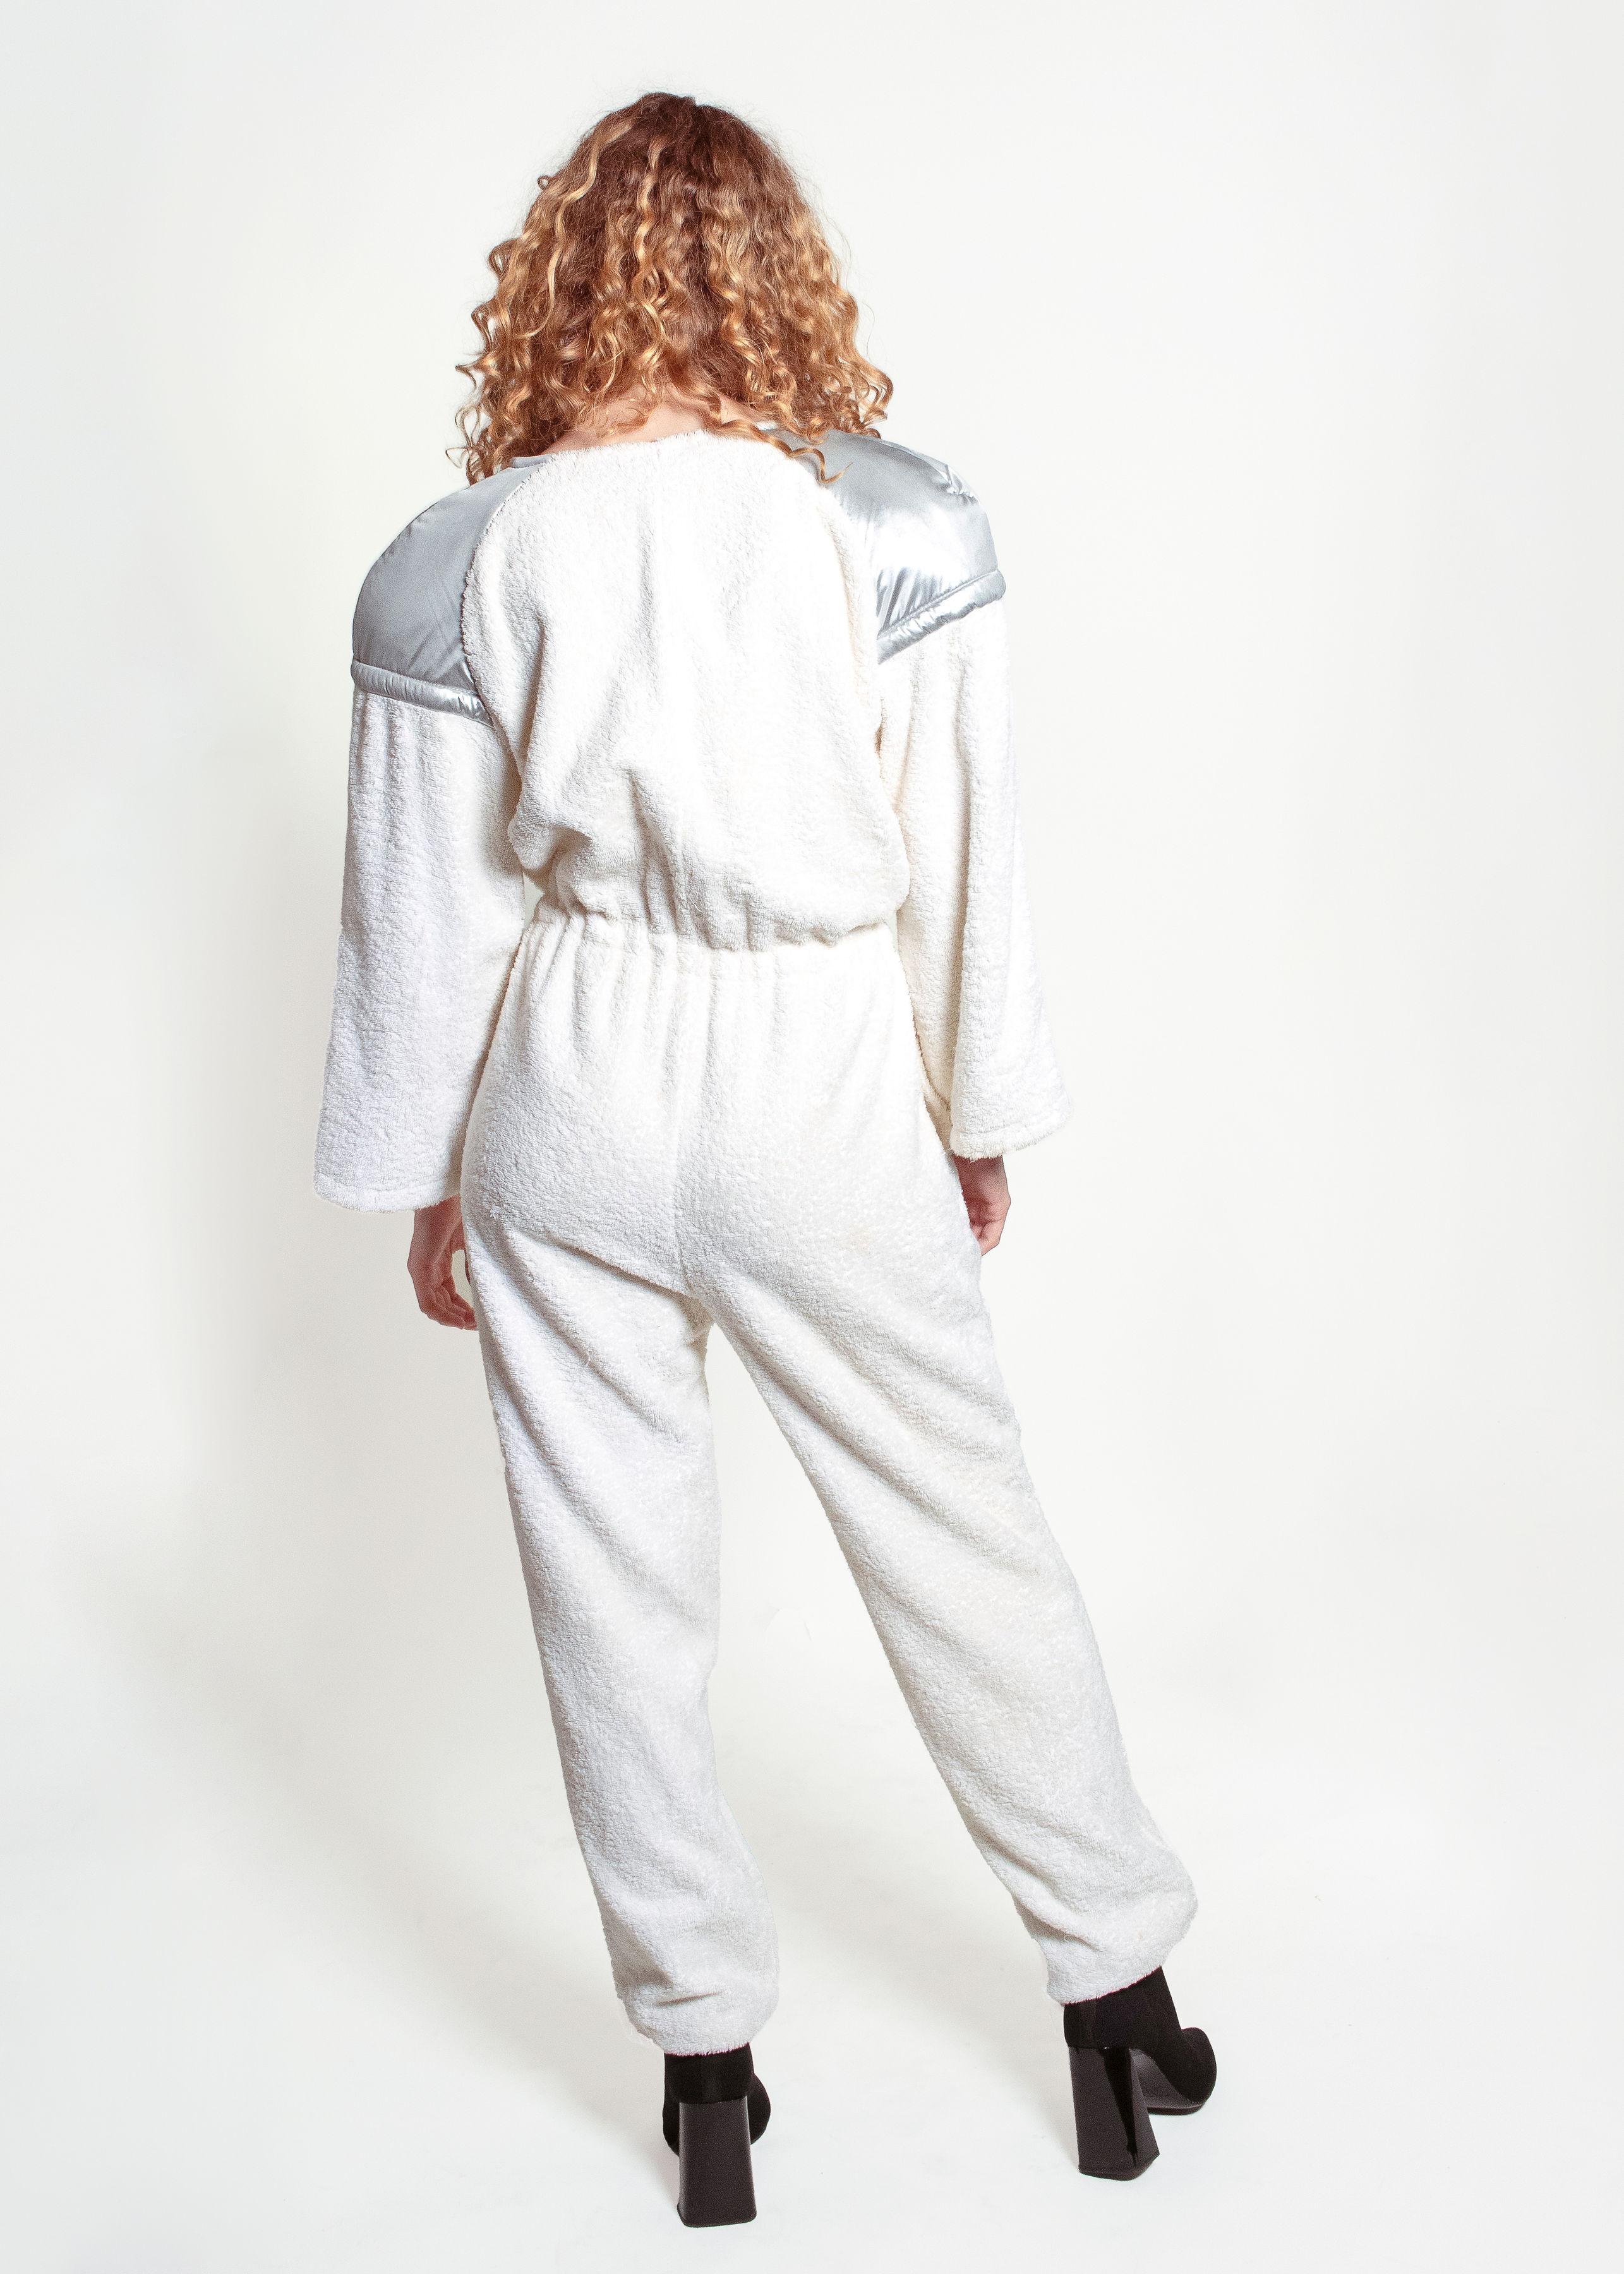 Courreges Terry Cloth Jumpsuit In Good Condition For Sale In Los Angeles, CA